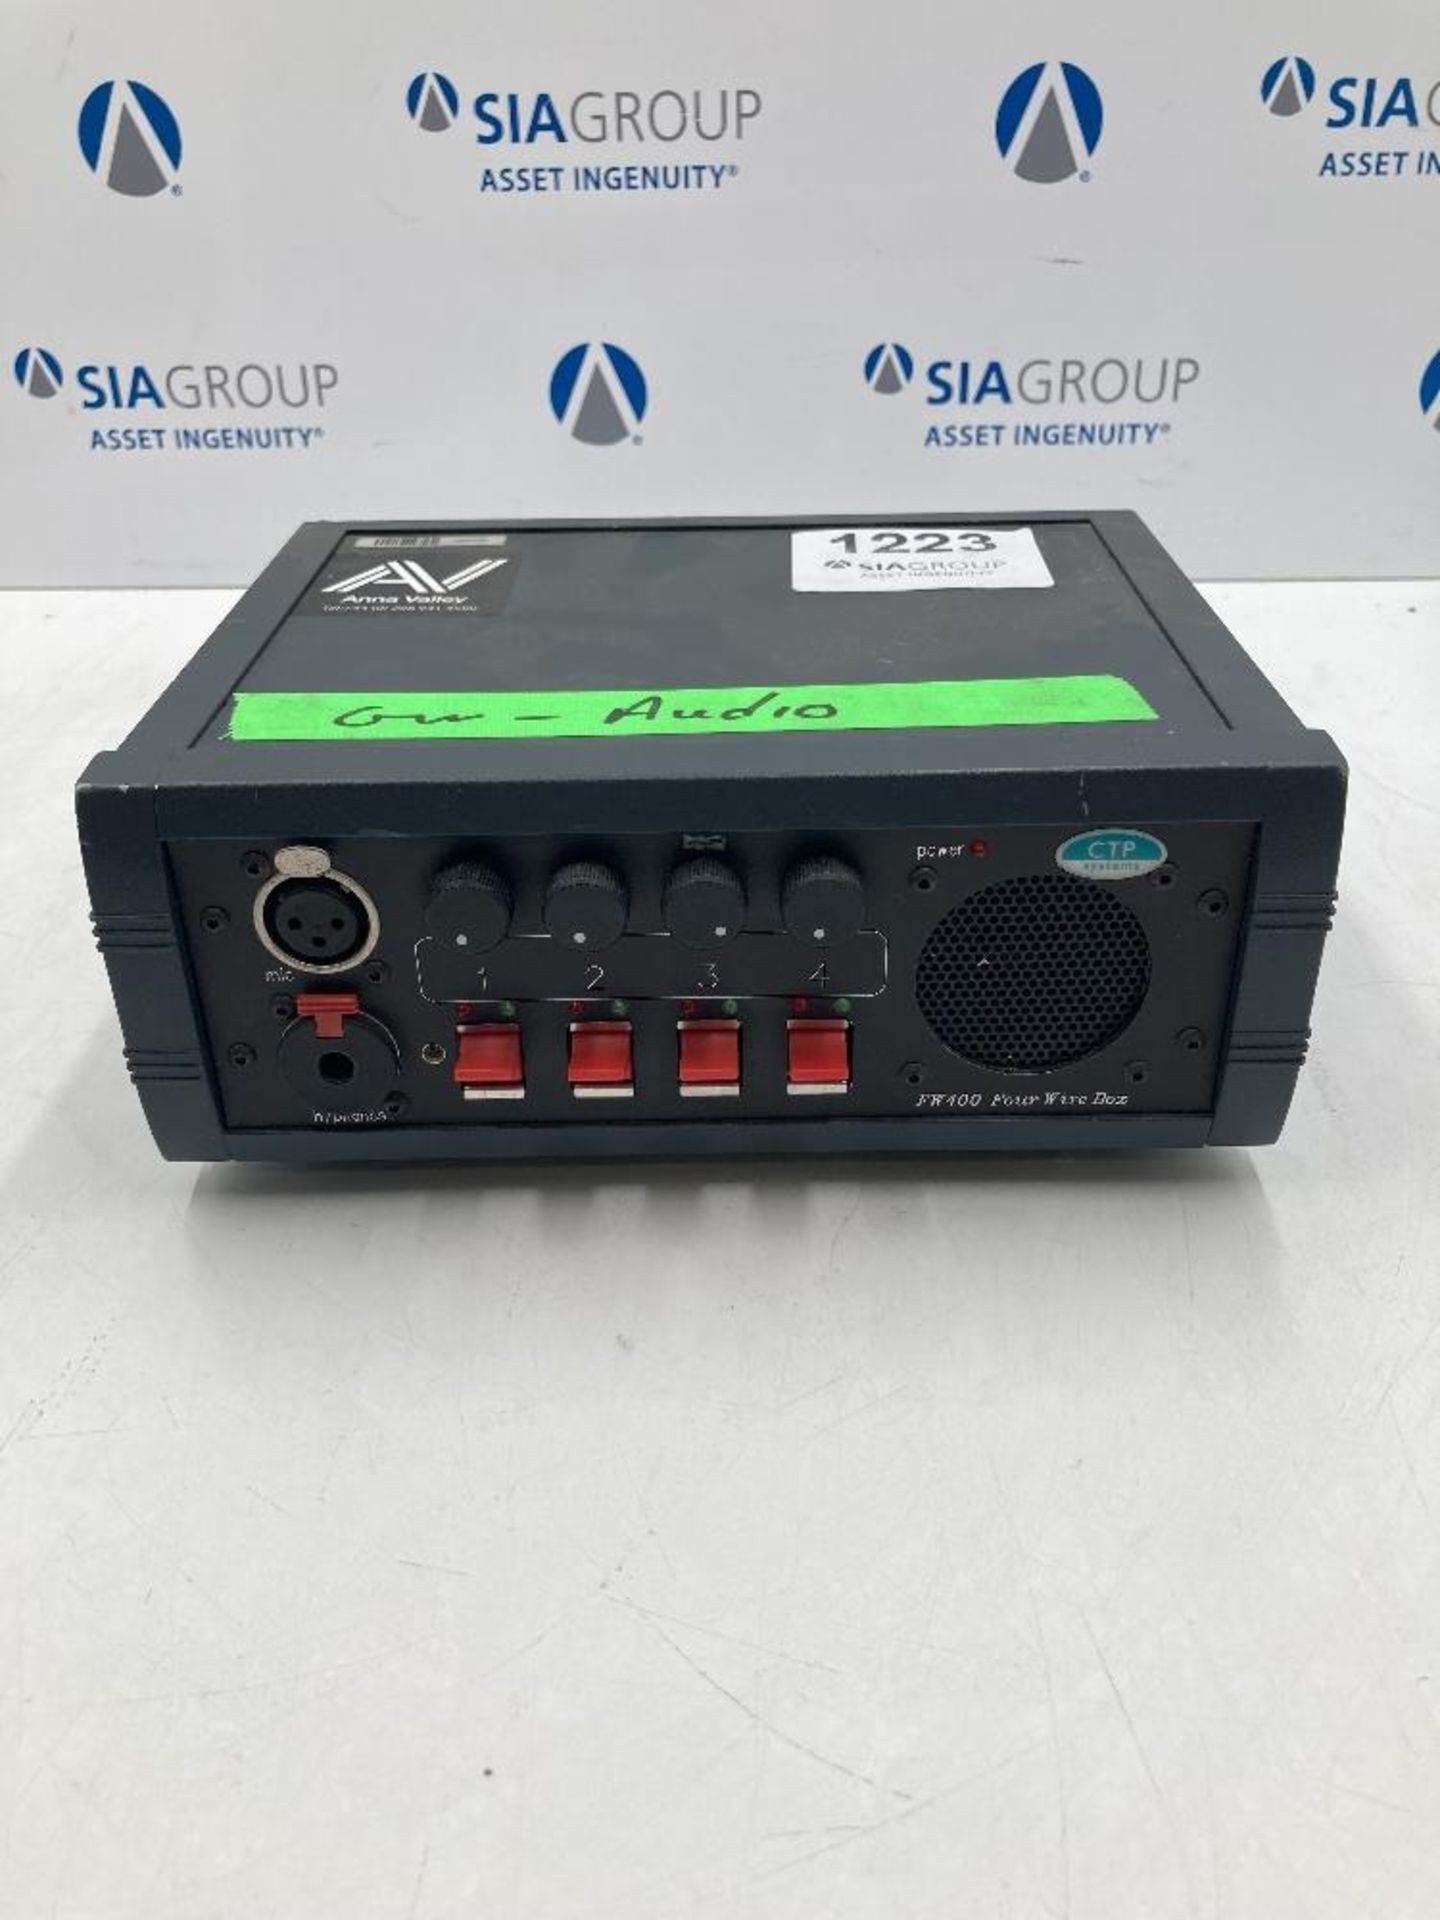 CTP FW400 Four Wire Box